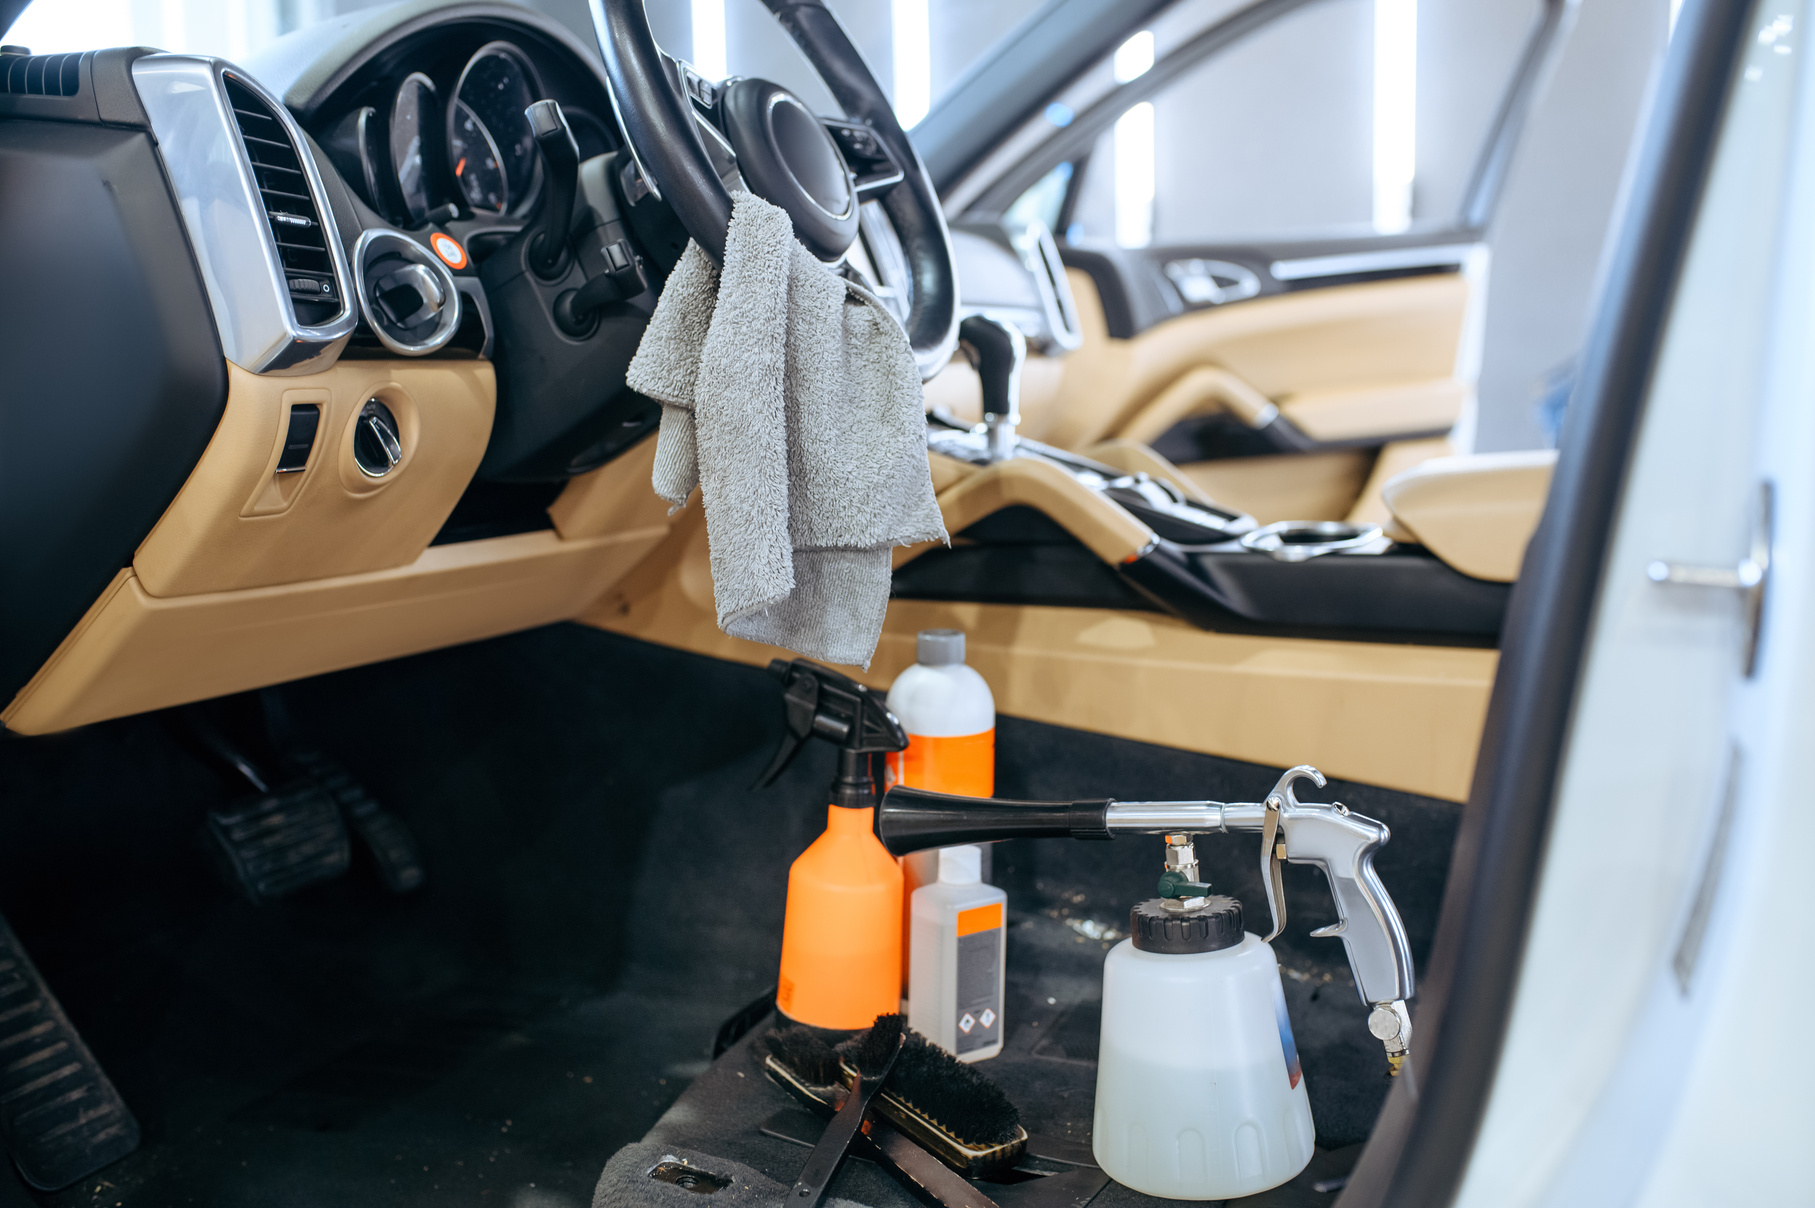 Car Interior and Tools for Dry Cleaning, Detailing